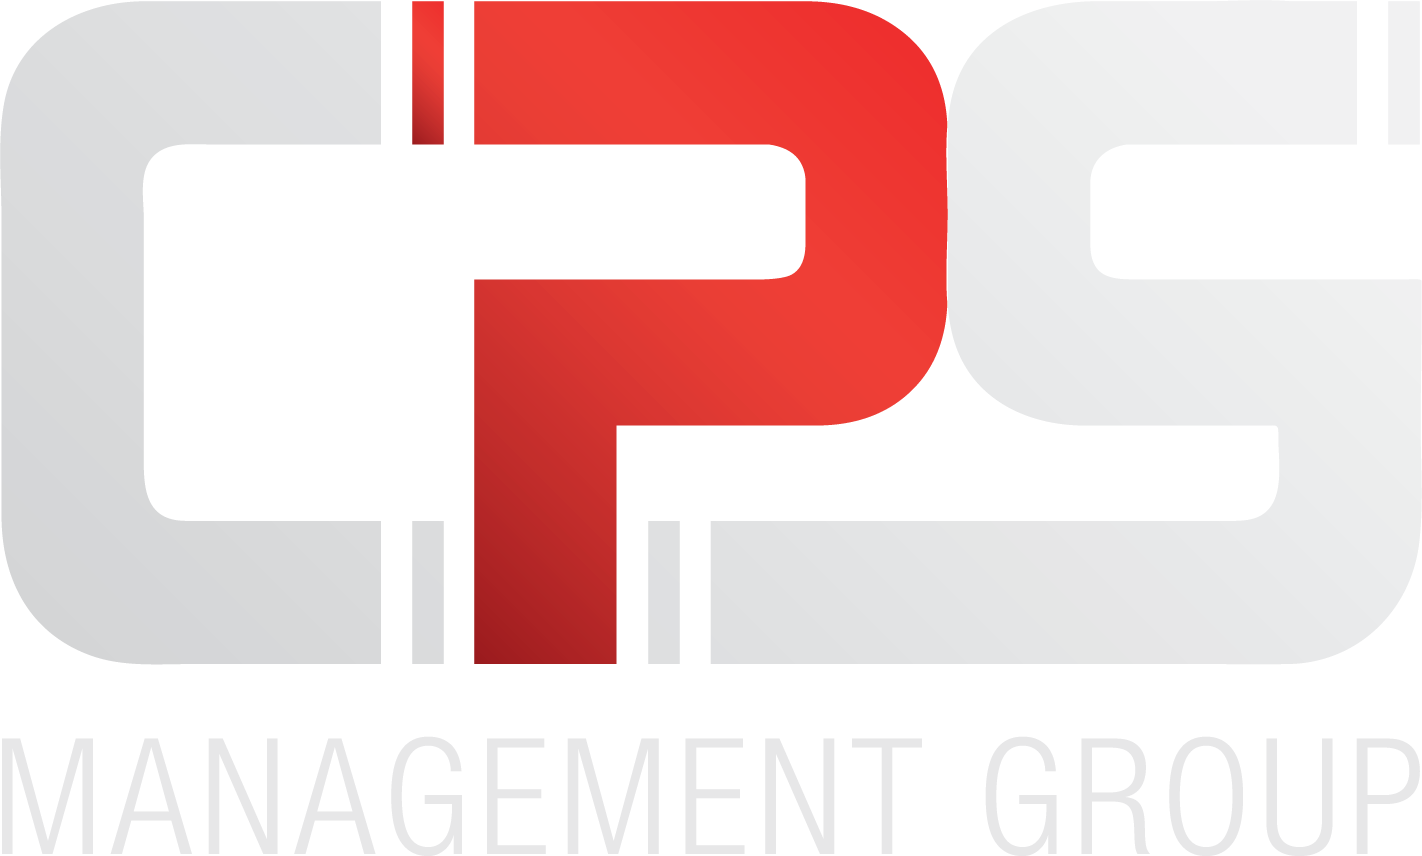 Cps Management Group - Sign (1422x856)